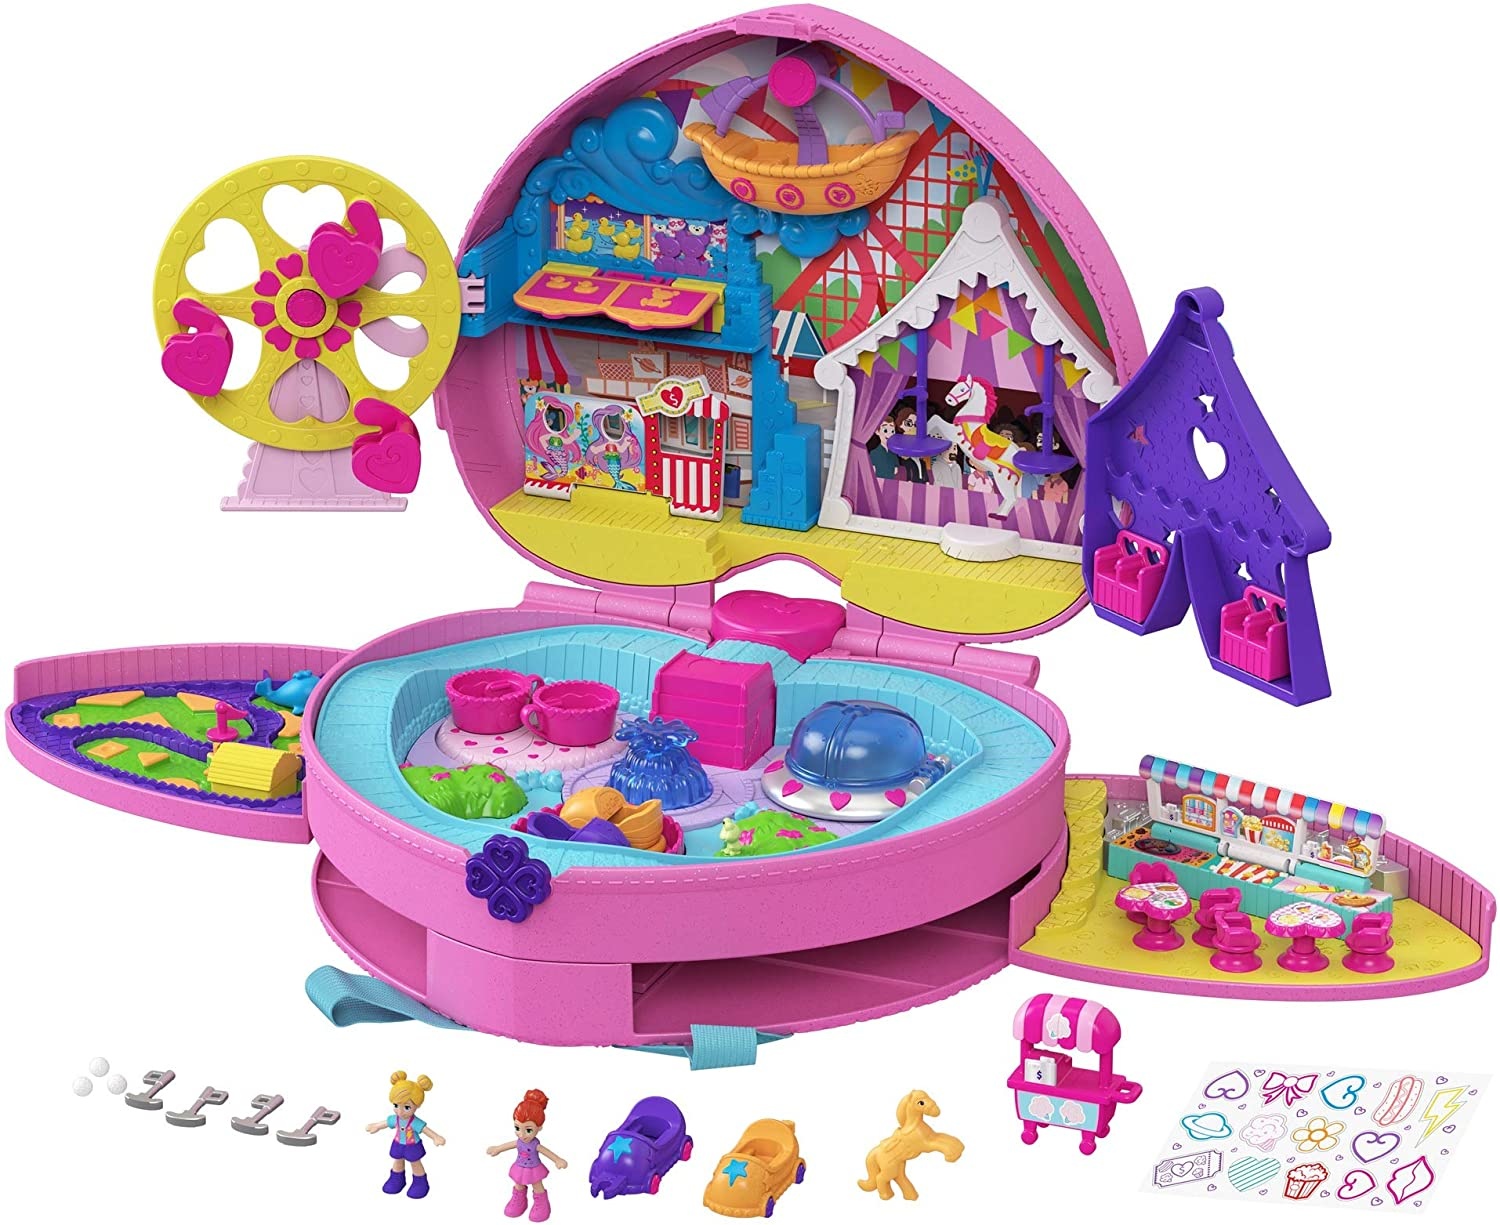  Polly Pocket 2-in-1 Travel Toy Playset, Unicorn Toy with 2  Dolls & 25 Surprise Accessories, Unicorn Party Large Compact : Toys & Games